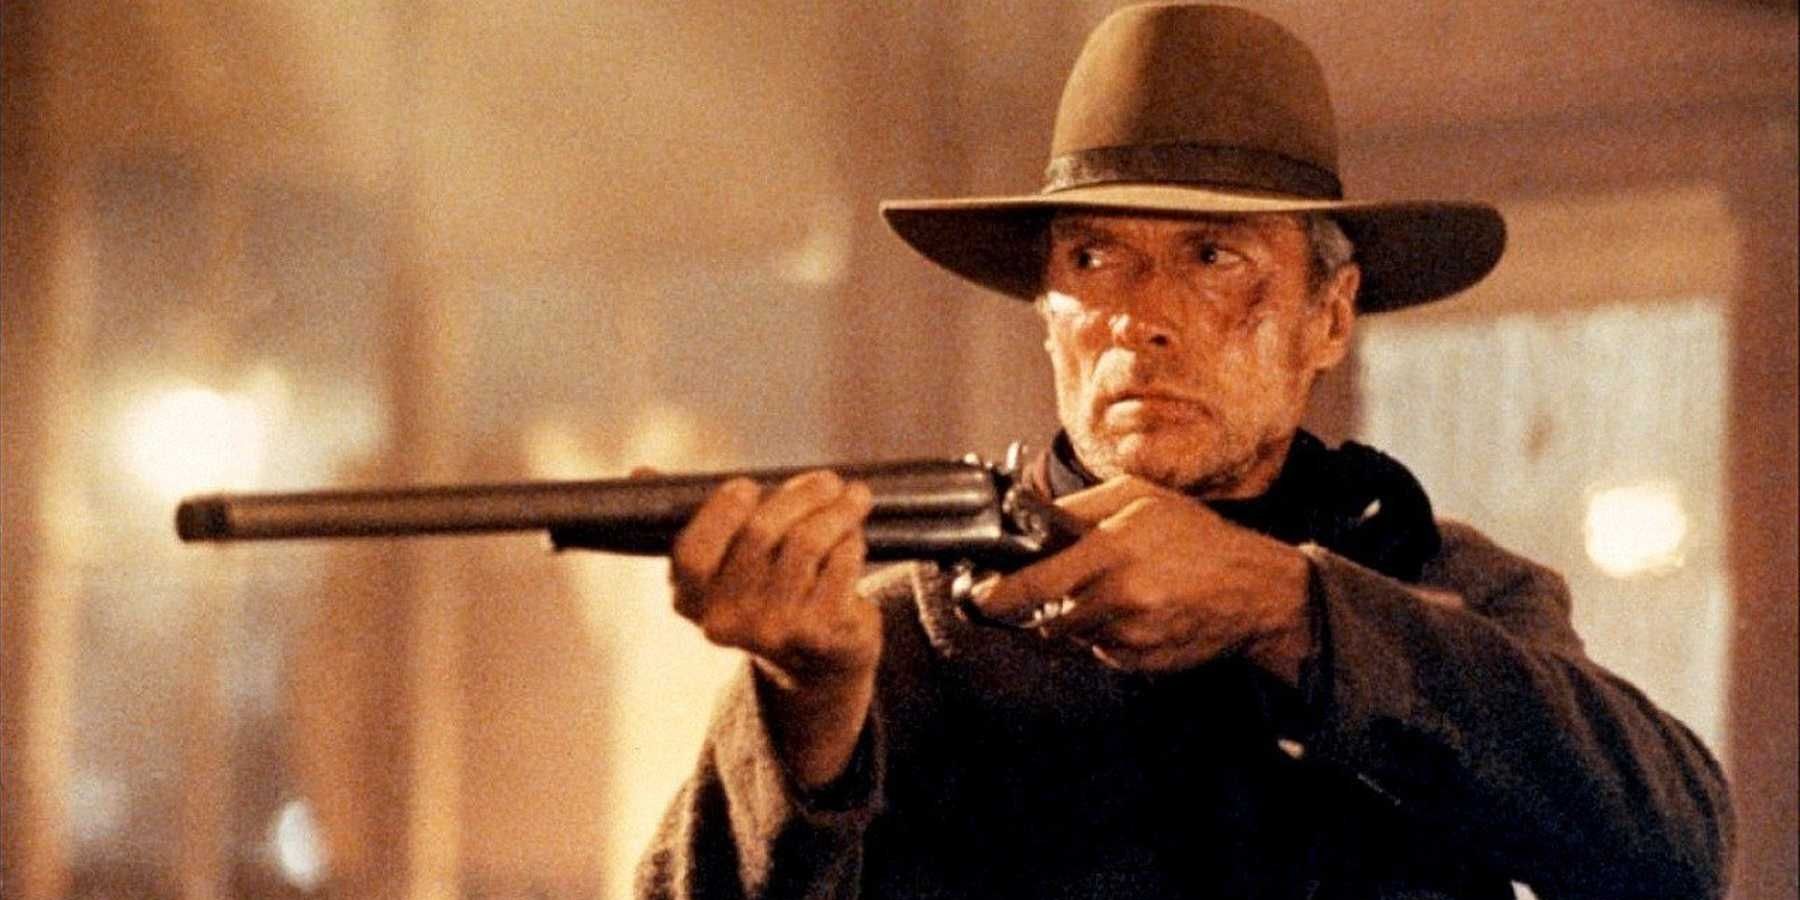 Clint Eastwood aiming his rifle in a saloon in Unforgiven